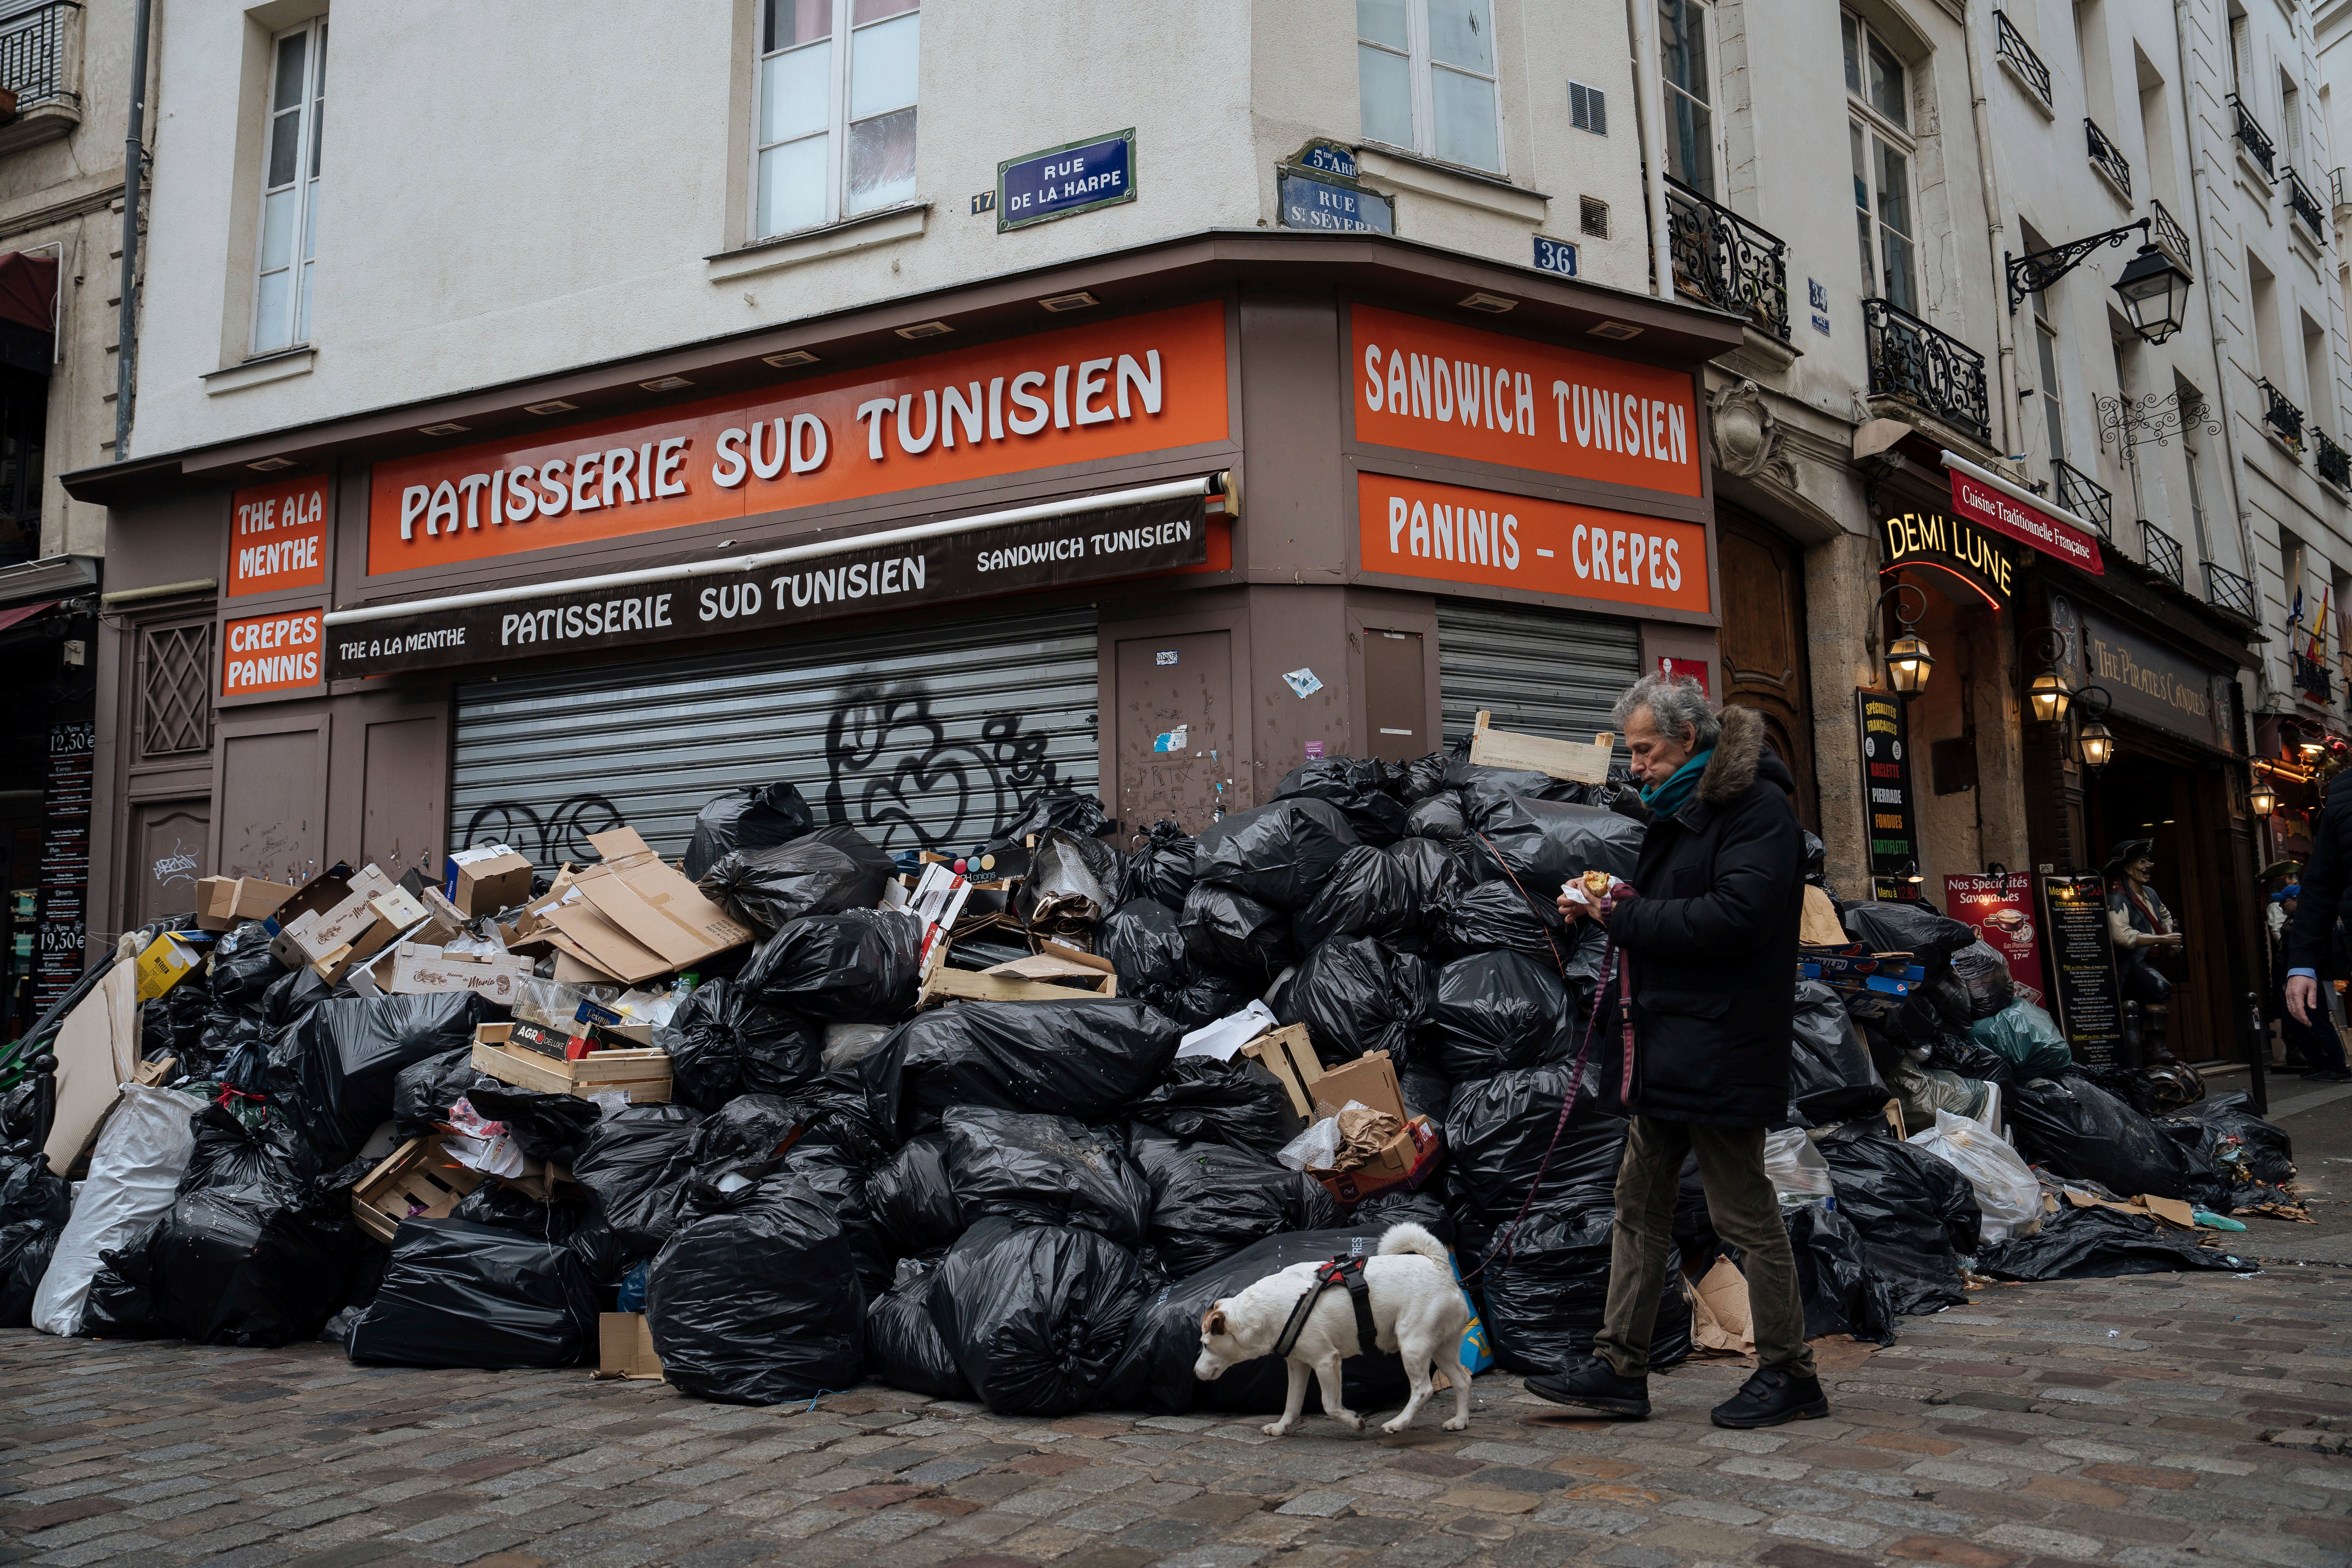 Bin strikes have been going on across France for more than a week